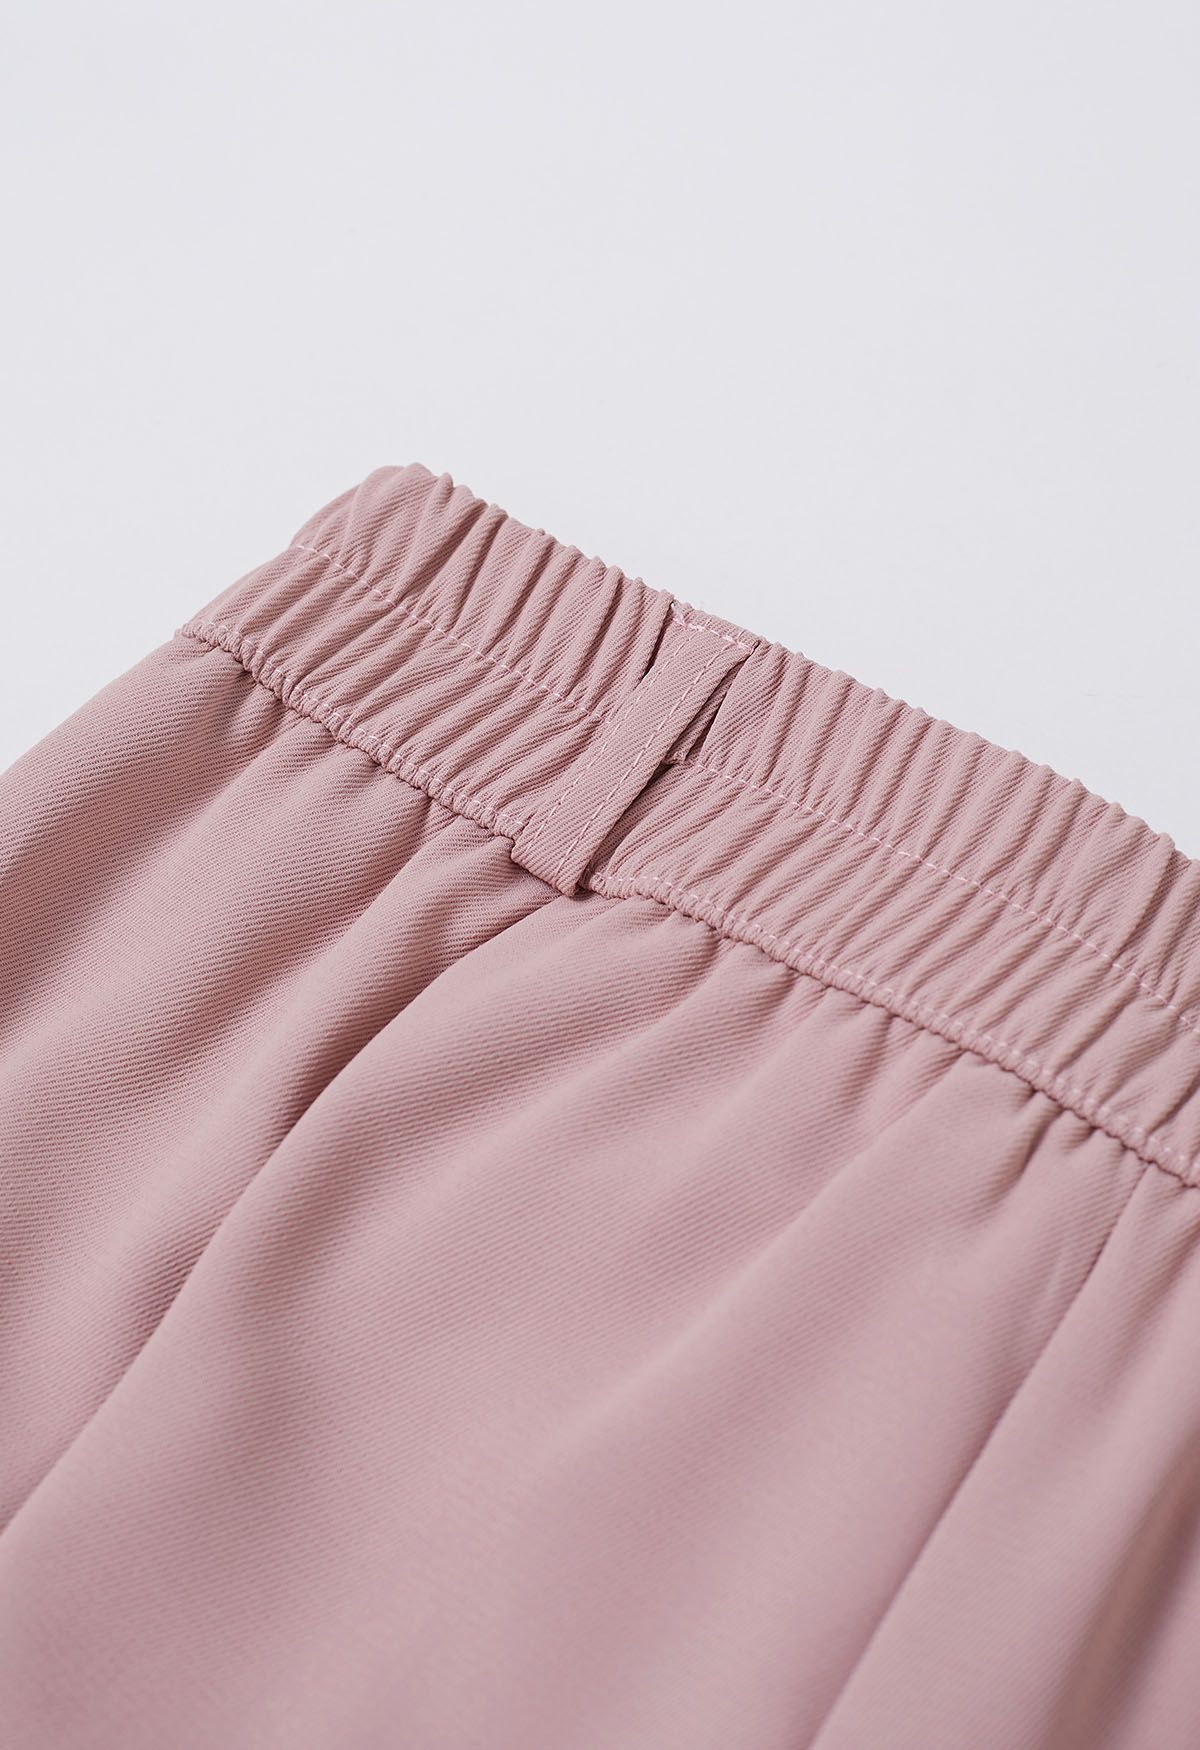 Simple Pleat Straight-Leg Pants in Pink - Retro, Indie and Unique Fashion